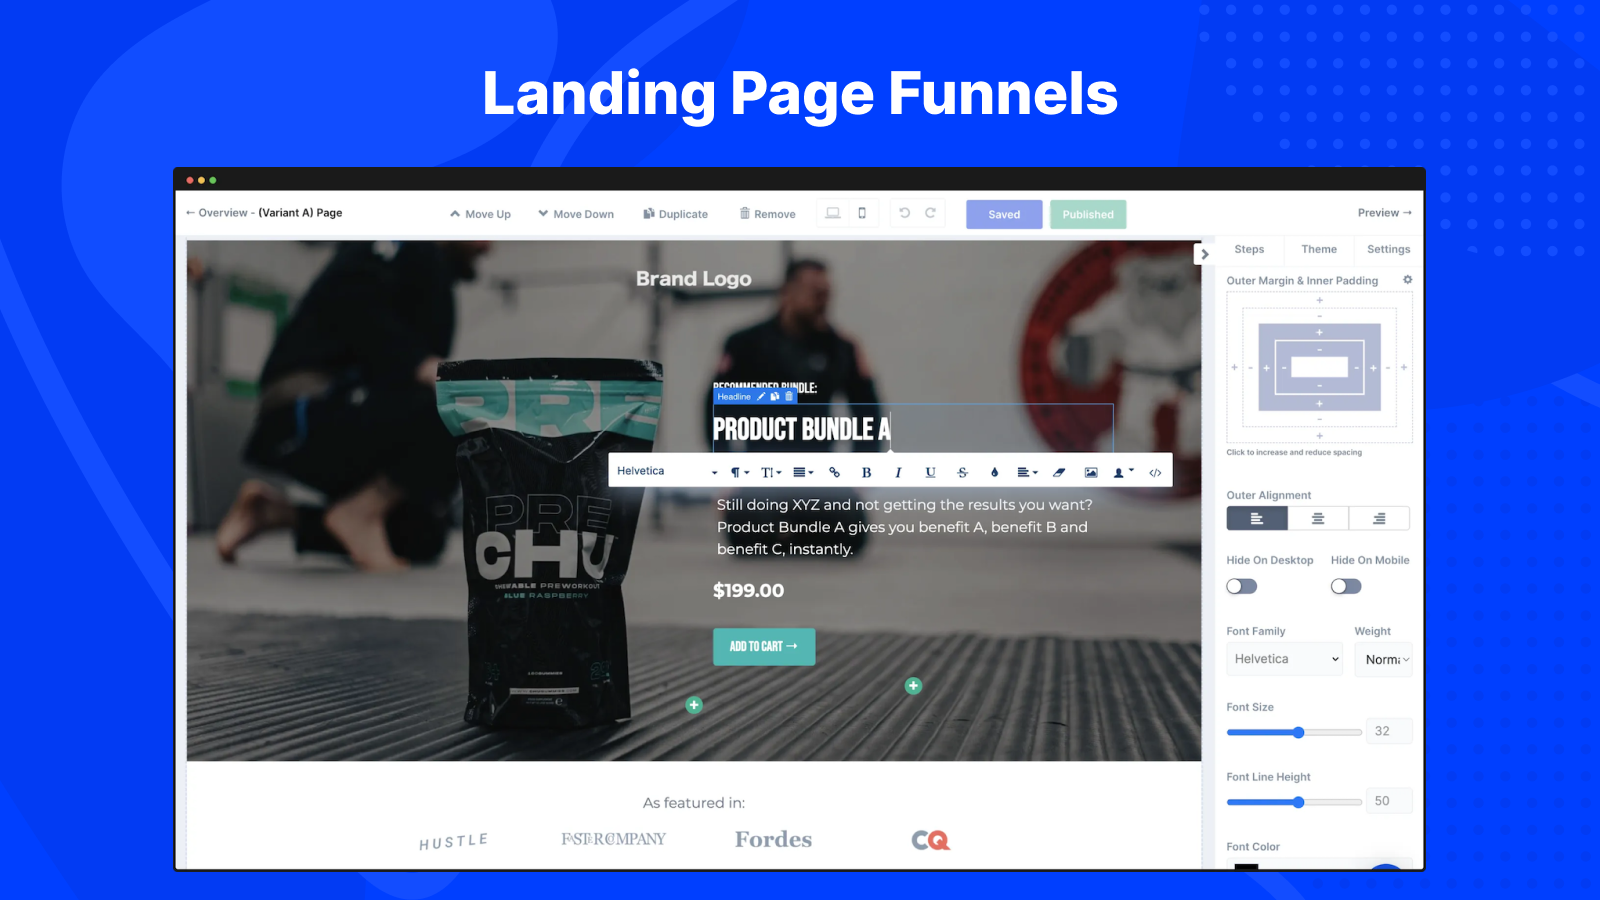 Landing Page Funnels